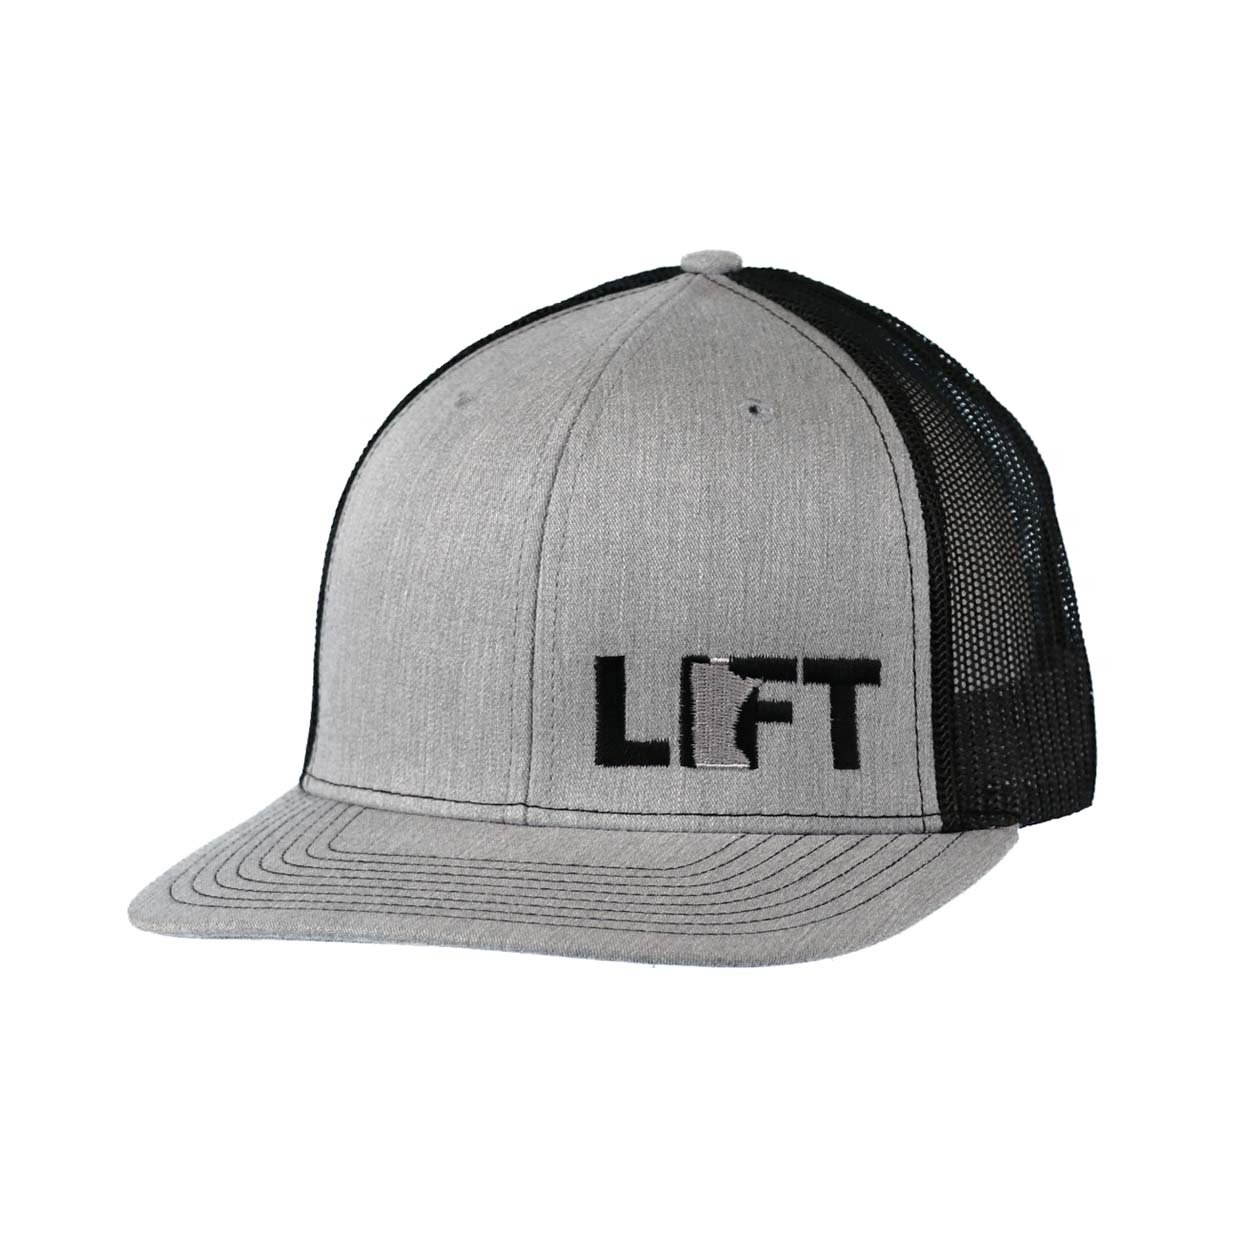 Lift Minnesota Classic Pro Night Out Embroidered Snapback Trucker Hat Heather Gray/Black